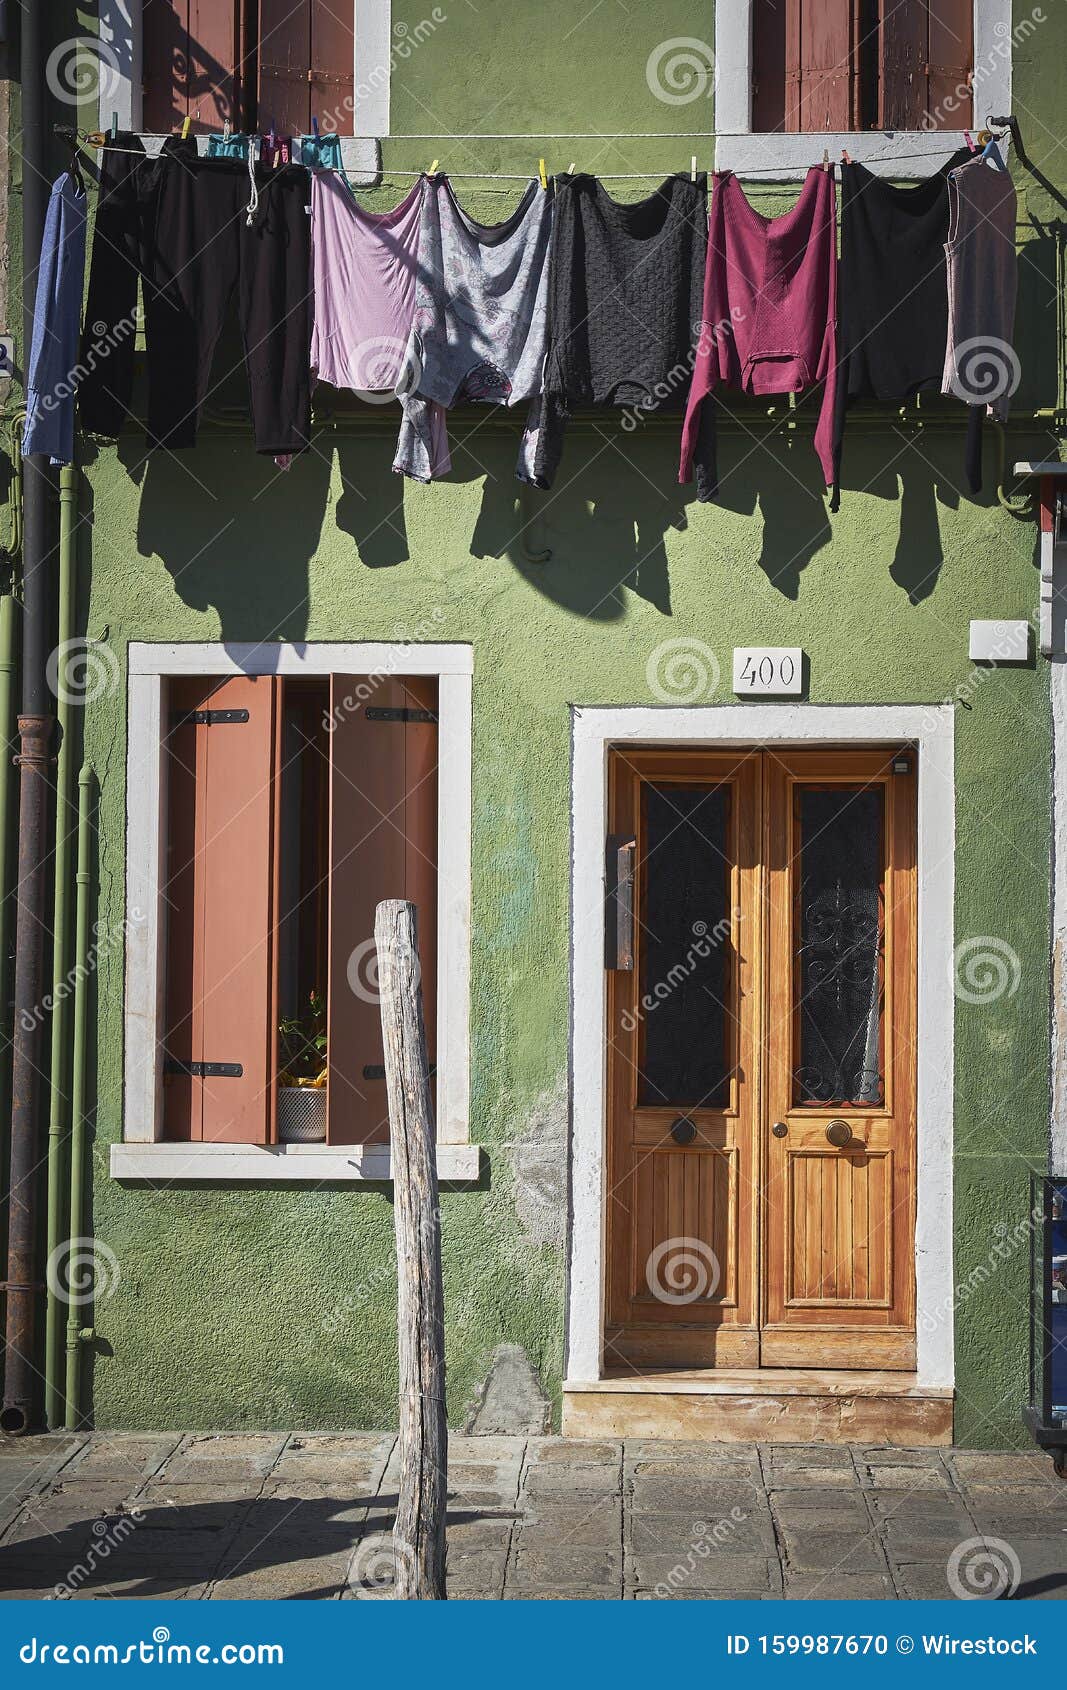 A Green Building with Wooden Doors and Windows and Colorful Clothes ...